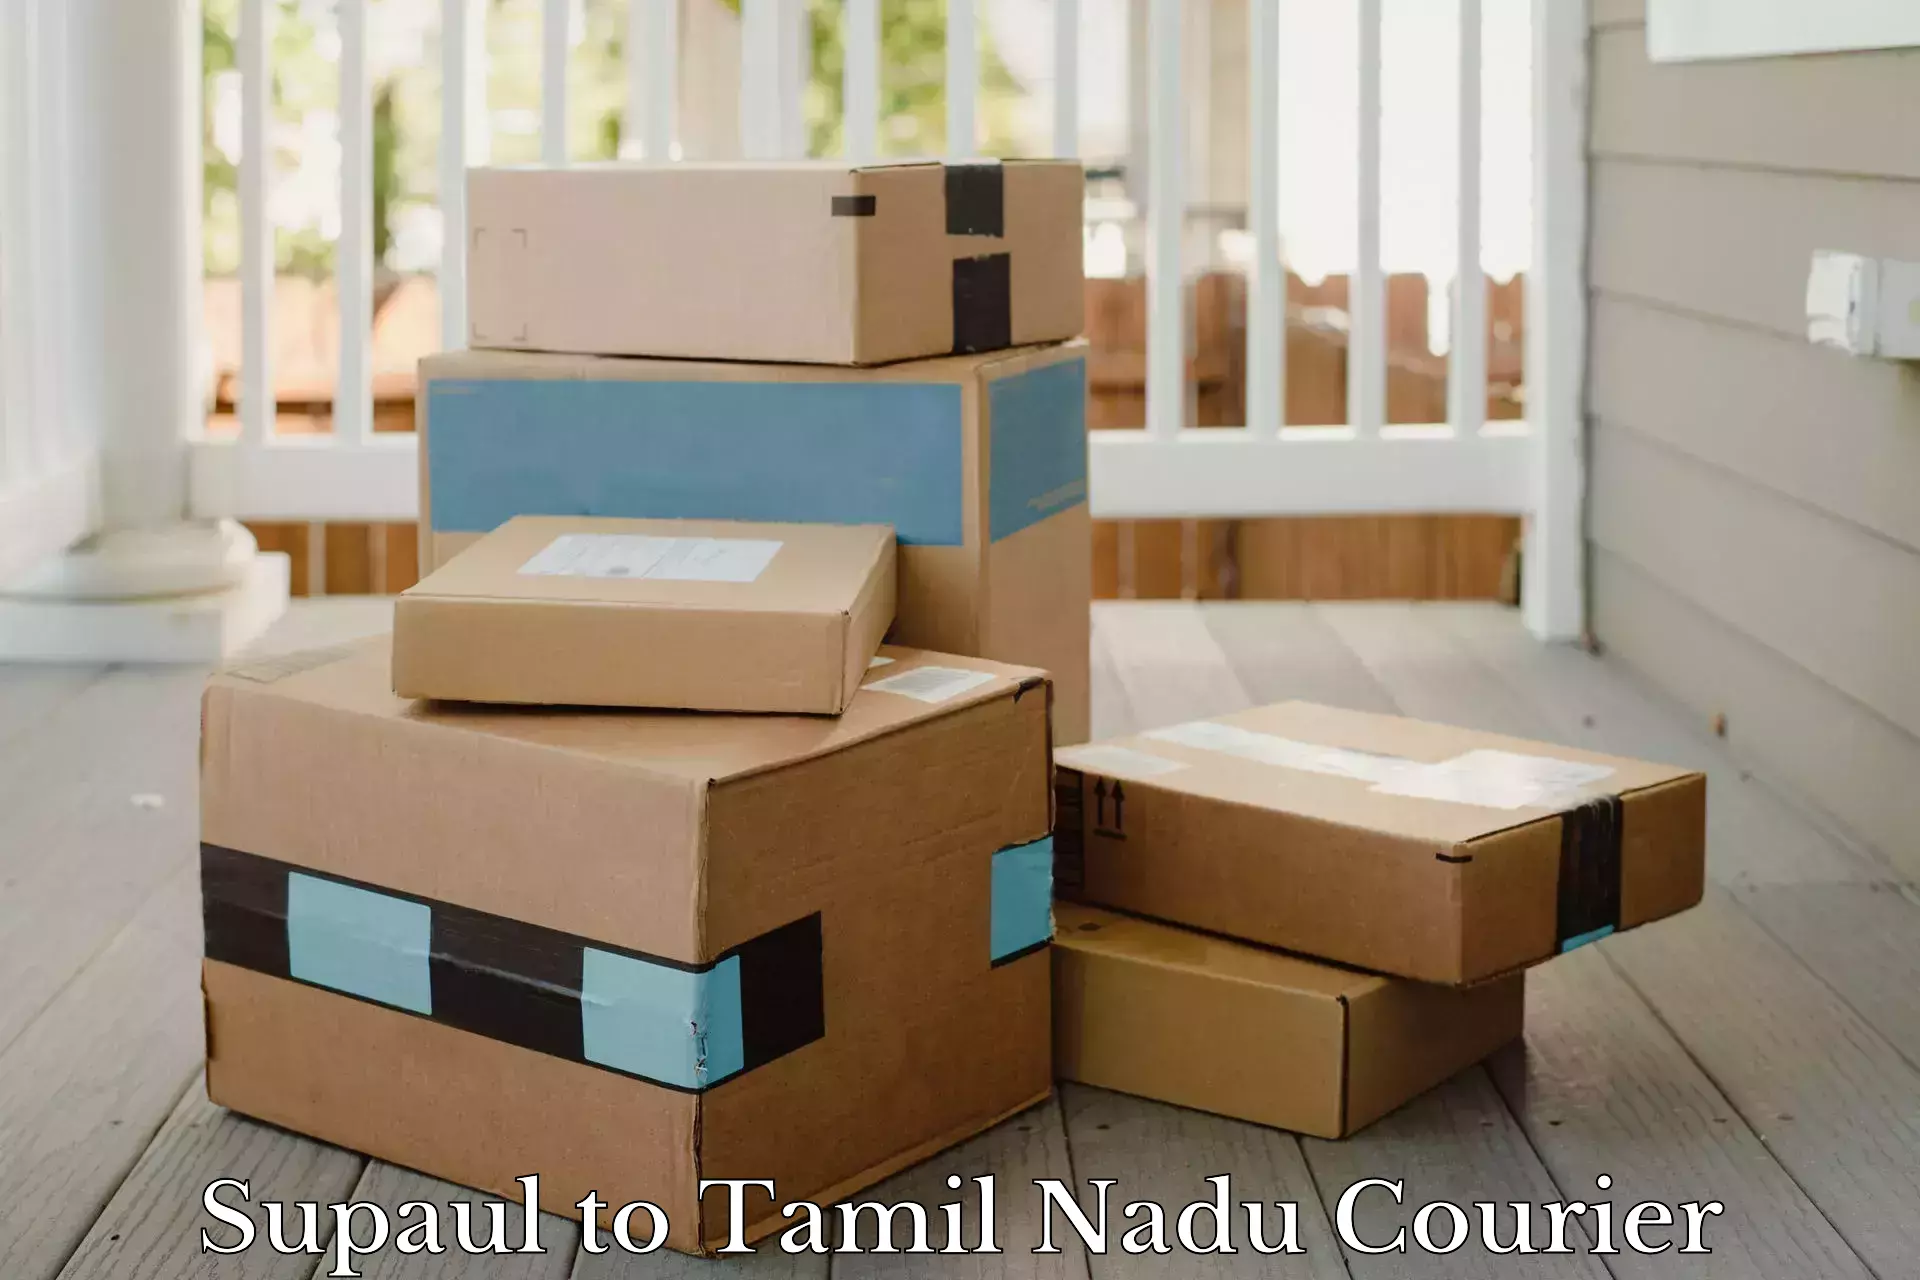 Delivery service partnership Supaul to Tirupur